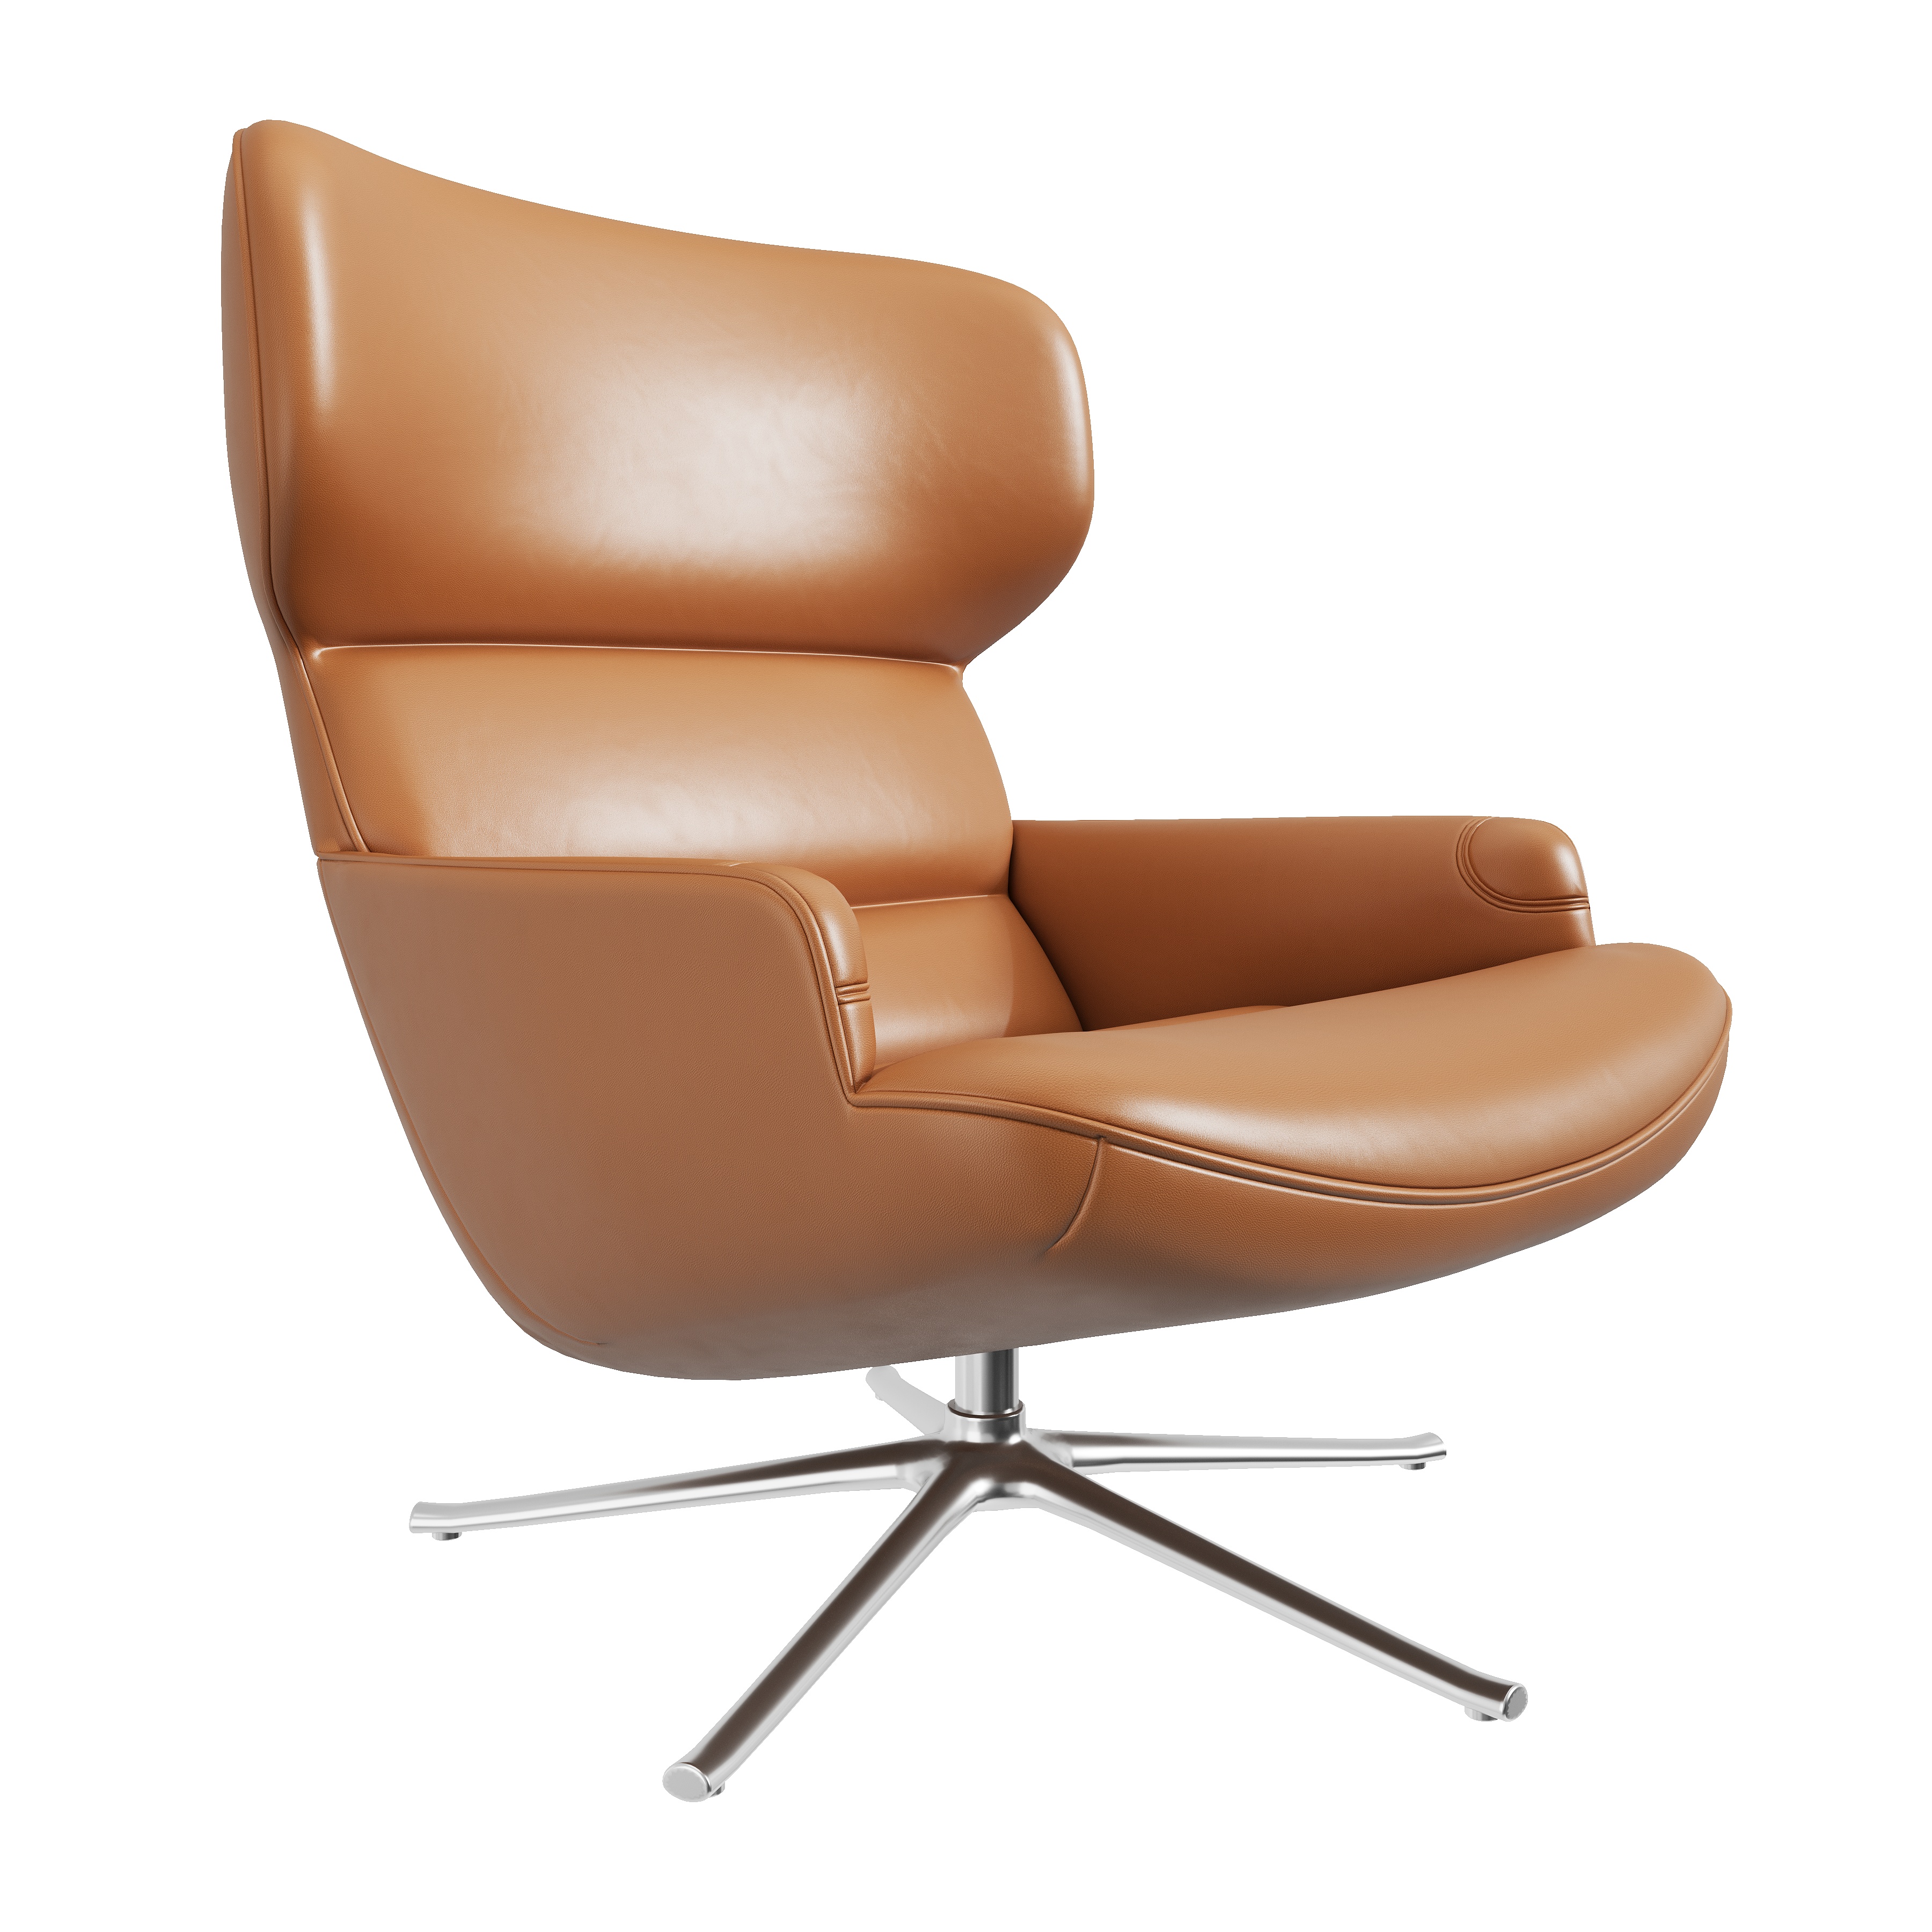 a brown leather chair with metal legs